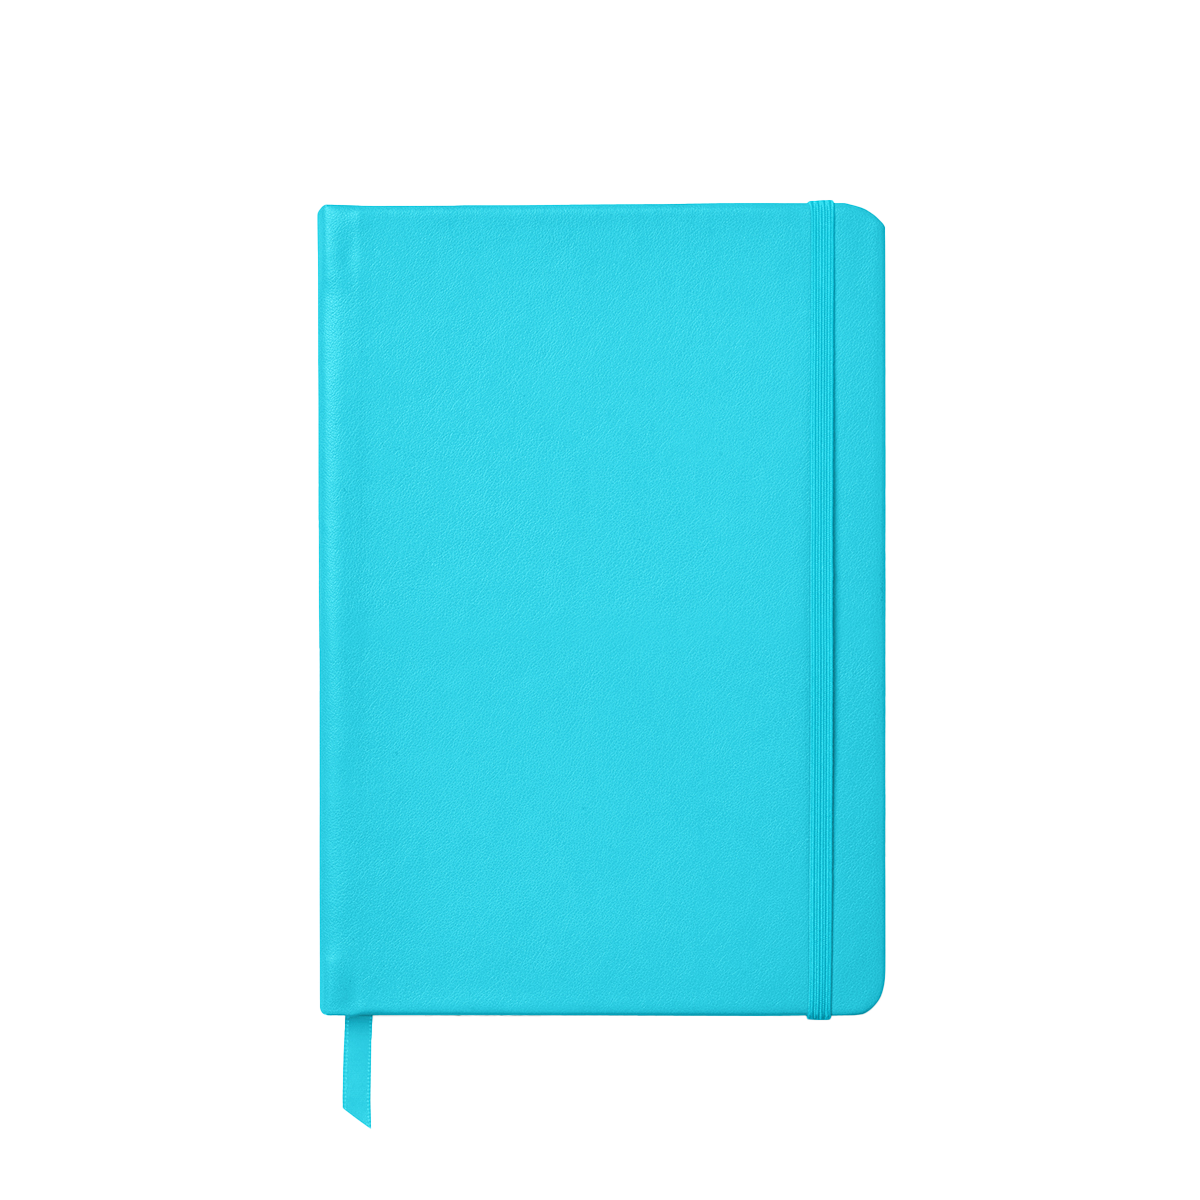 NAB_PF_concept_Soft_notebook_Sky_W.png